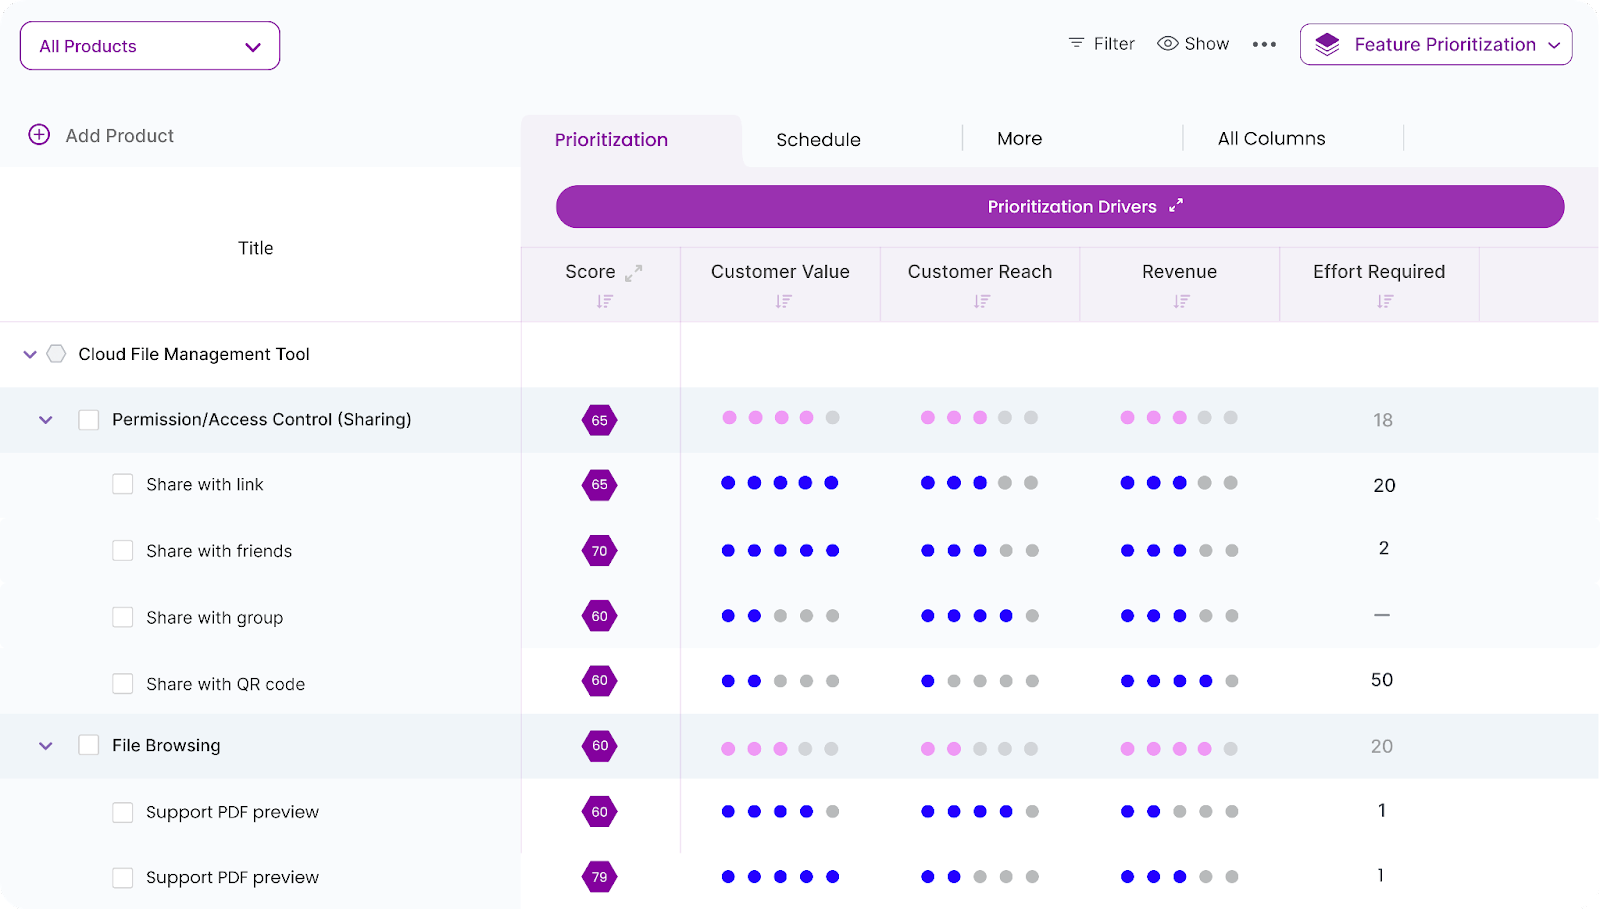 A screenshot of Chisel's Treeview tool, displaying an intuitive interface for adding and scoring product features, components, and task assignments for specific releases, streamlining product management and planning processes.